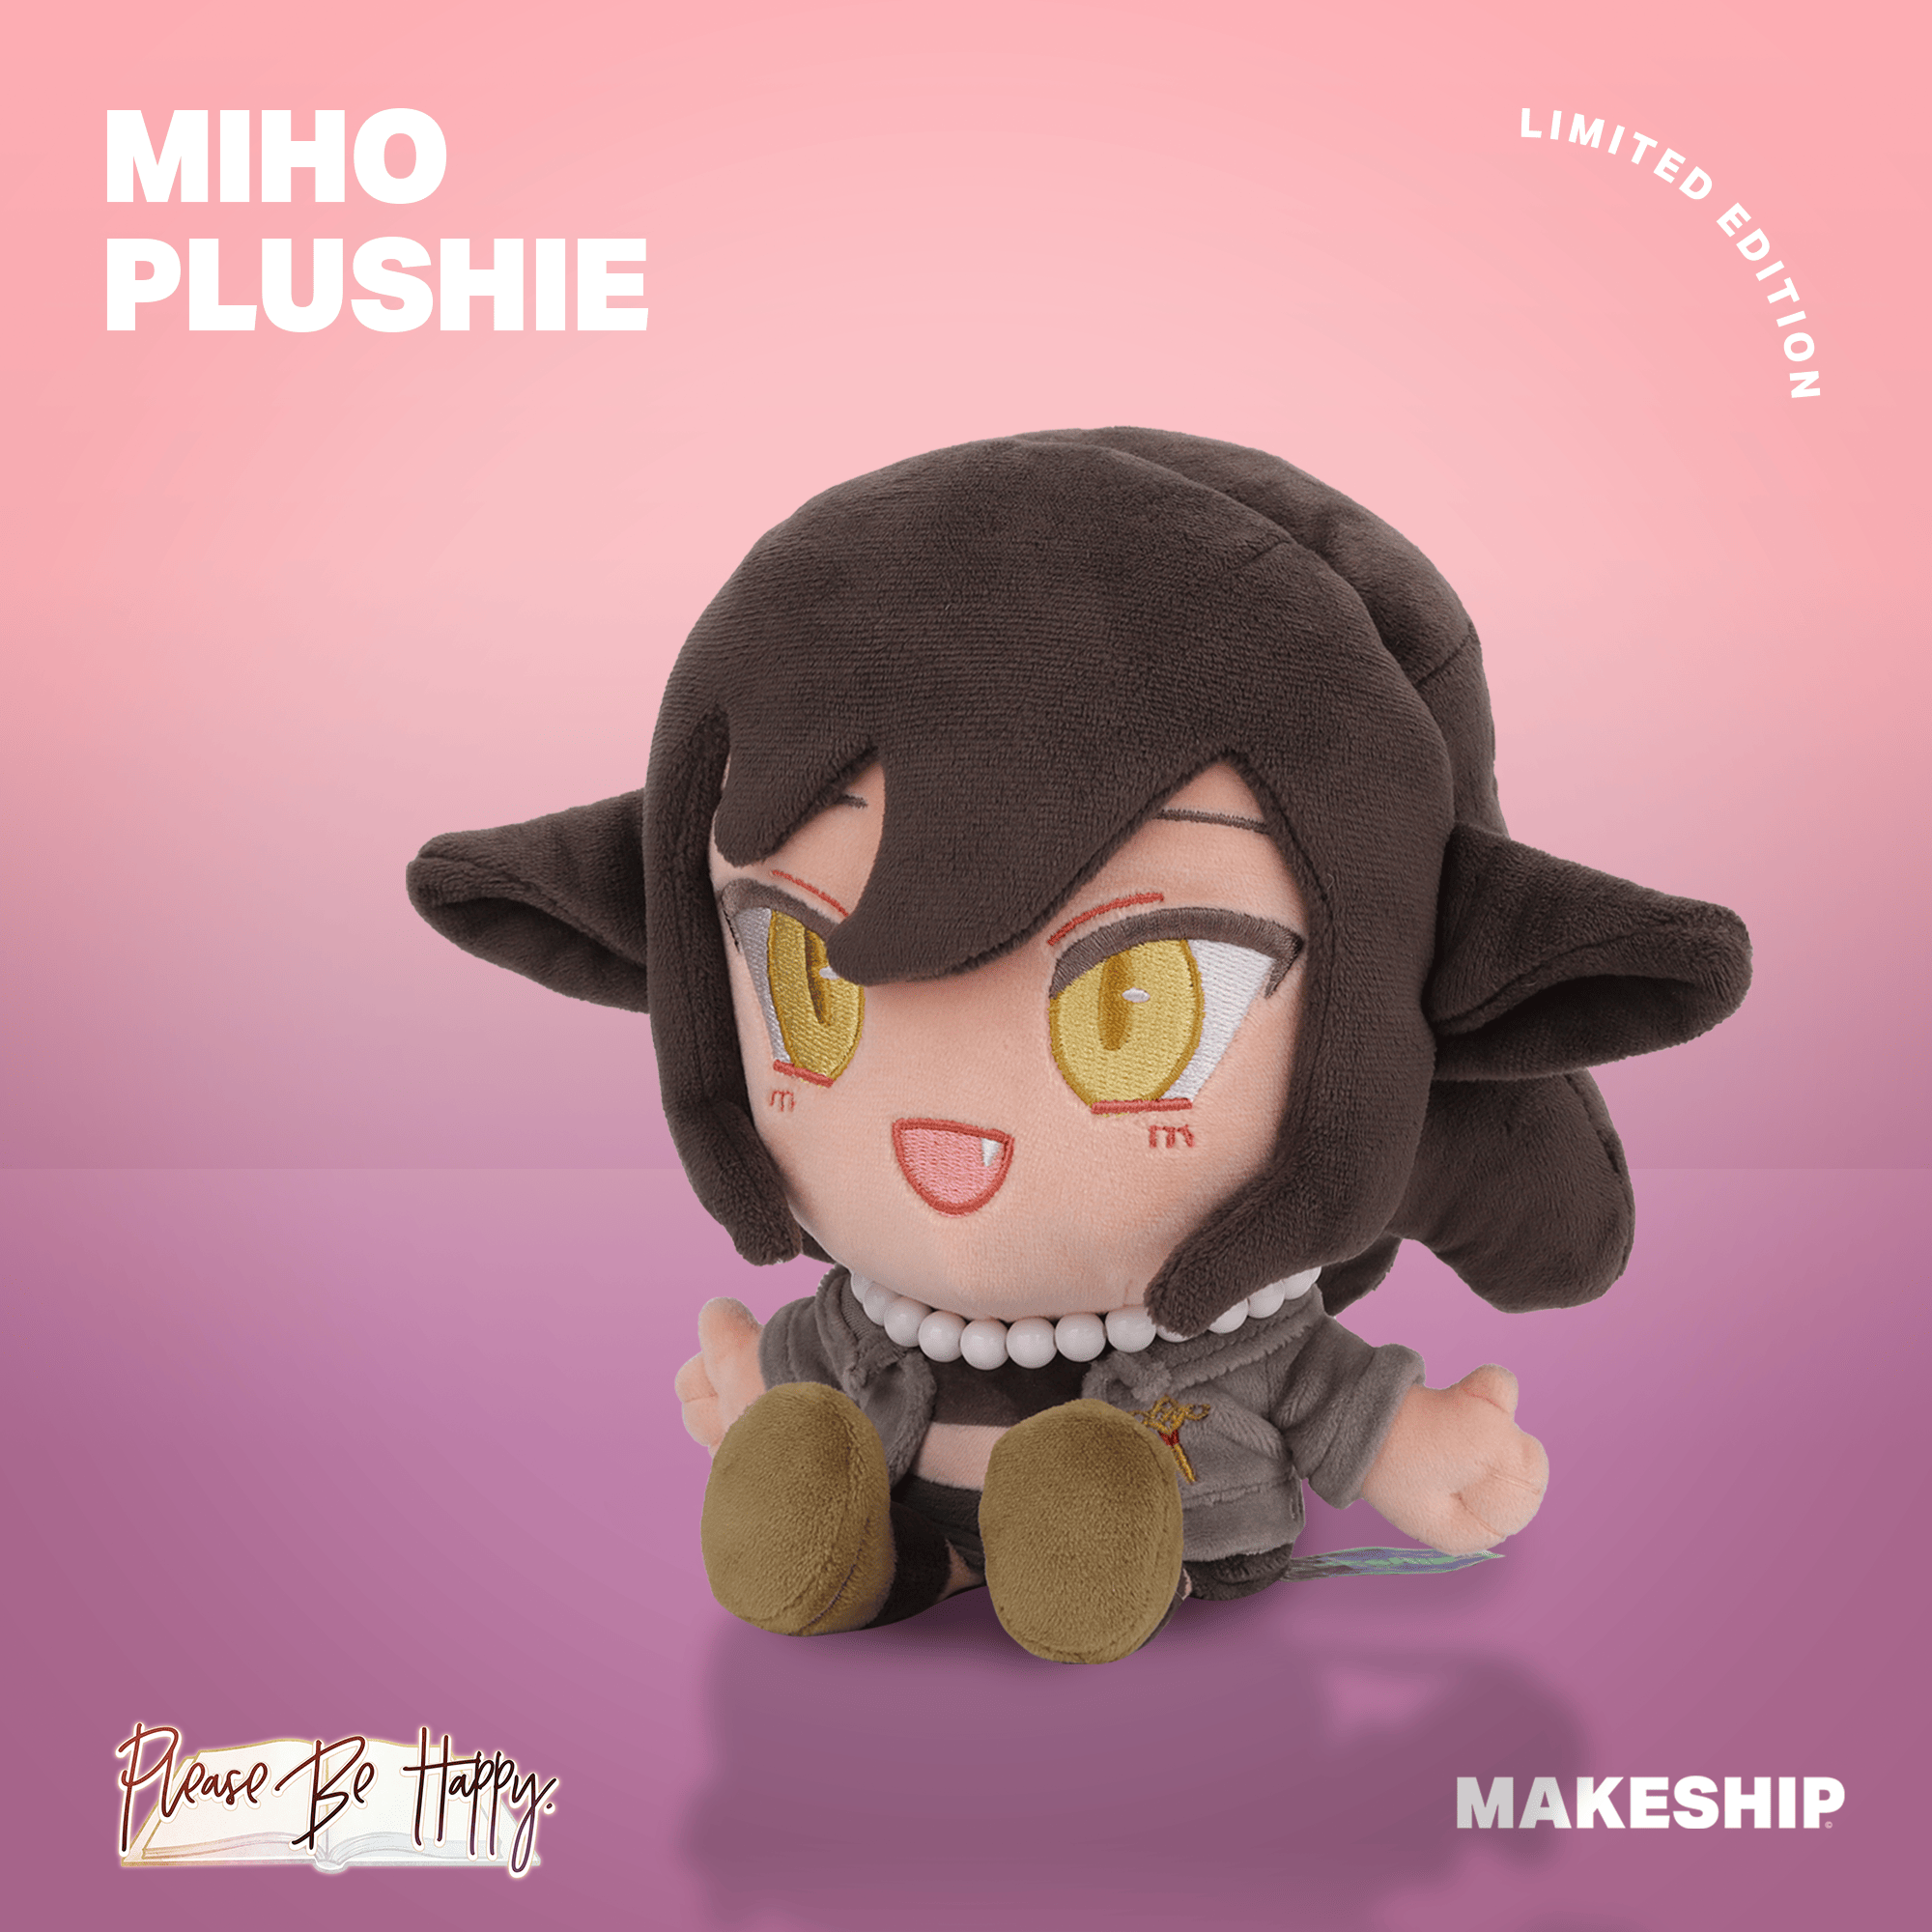 A photo of a plushie of Miho, available from Makeship.